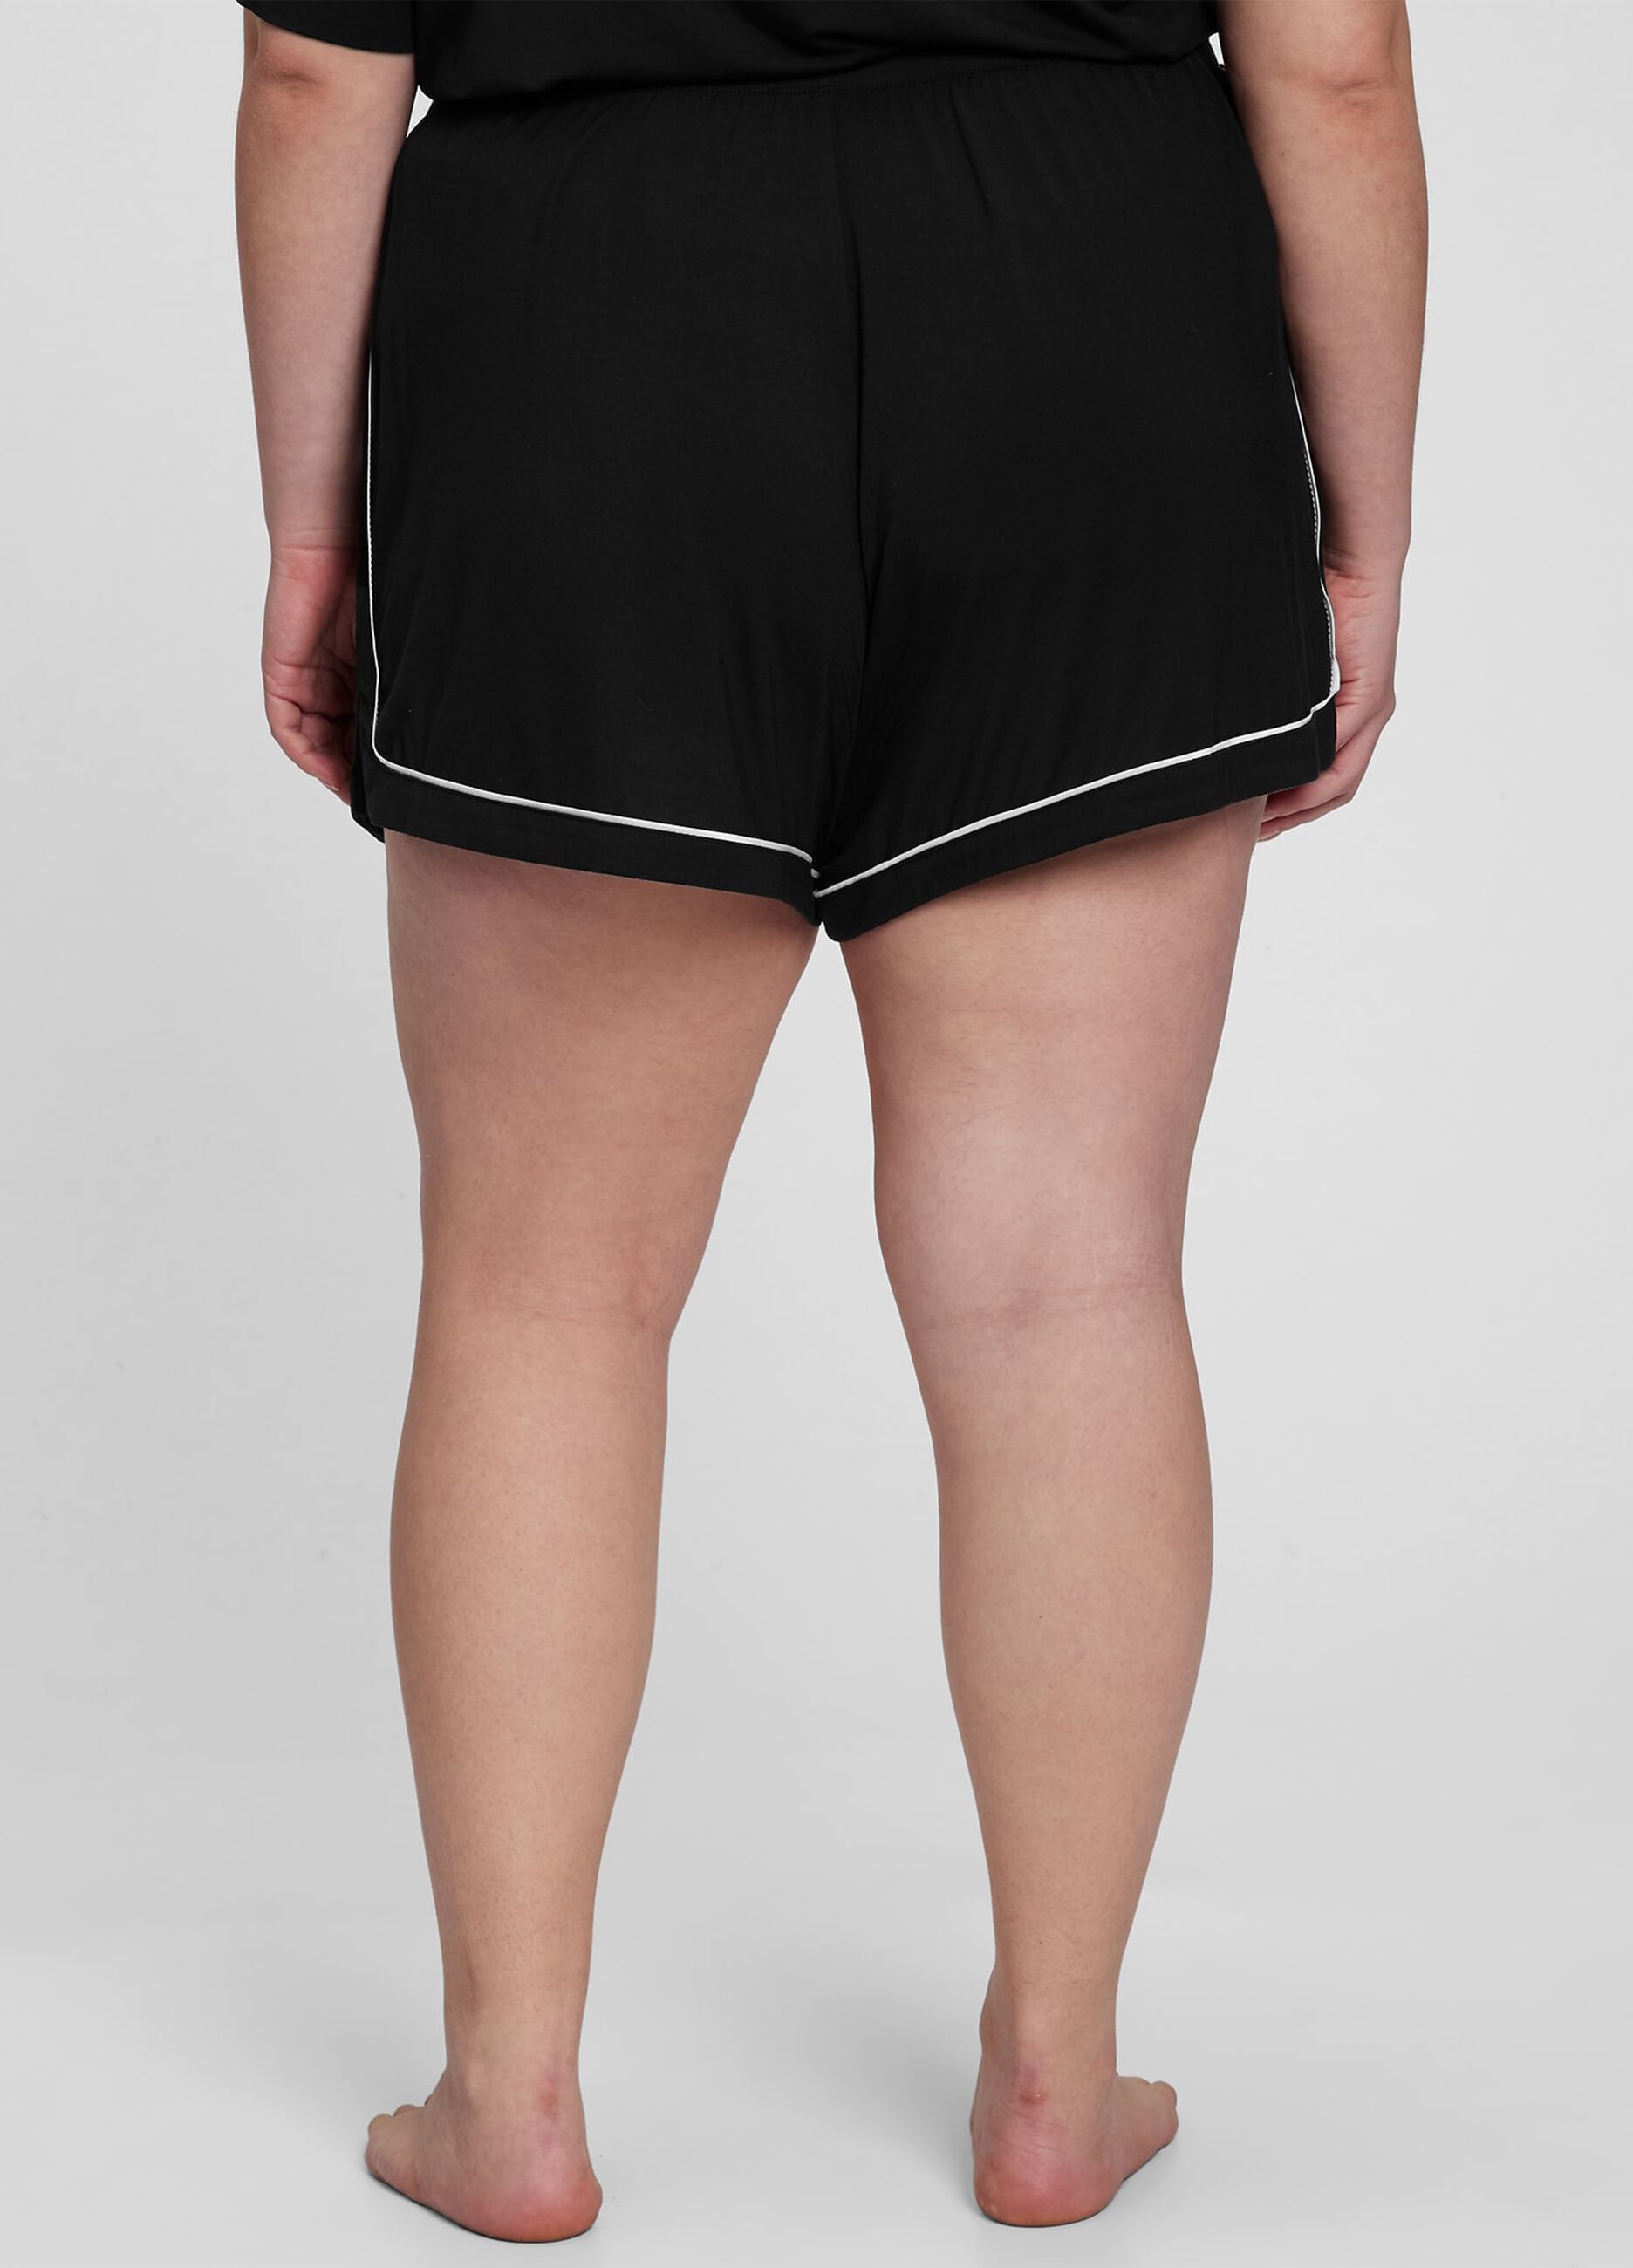 Pyjama shorts with contrasting piping